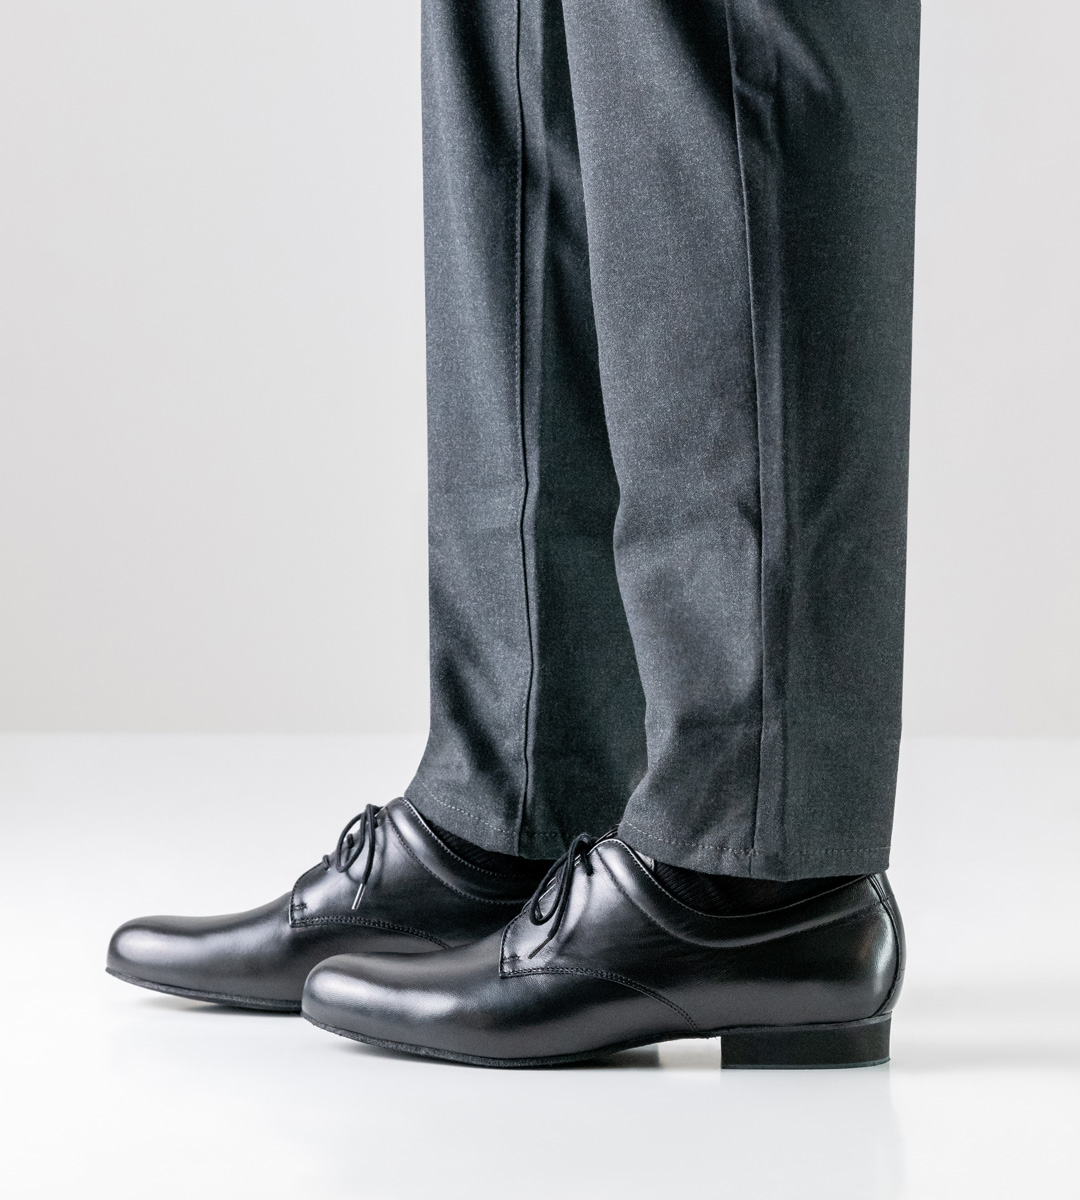 Side view of Werner Kern men's dance shoe with micro heel in combination with grey trousers